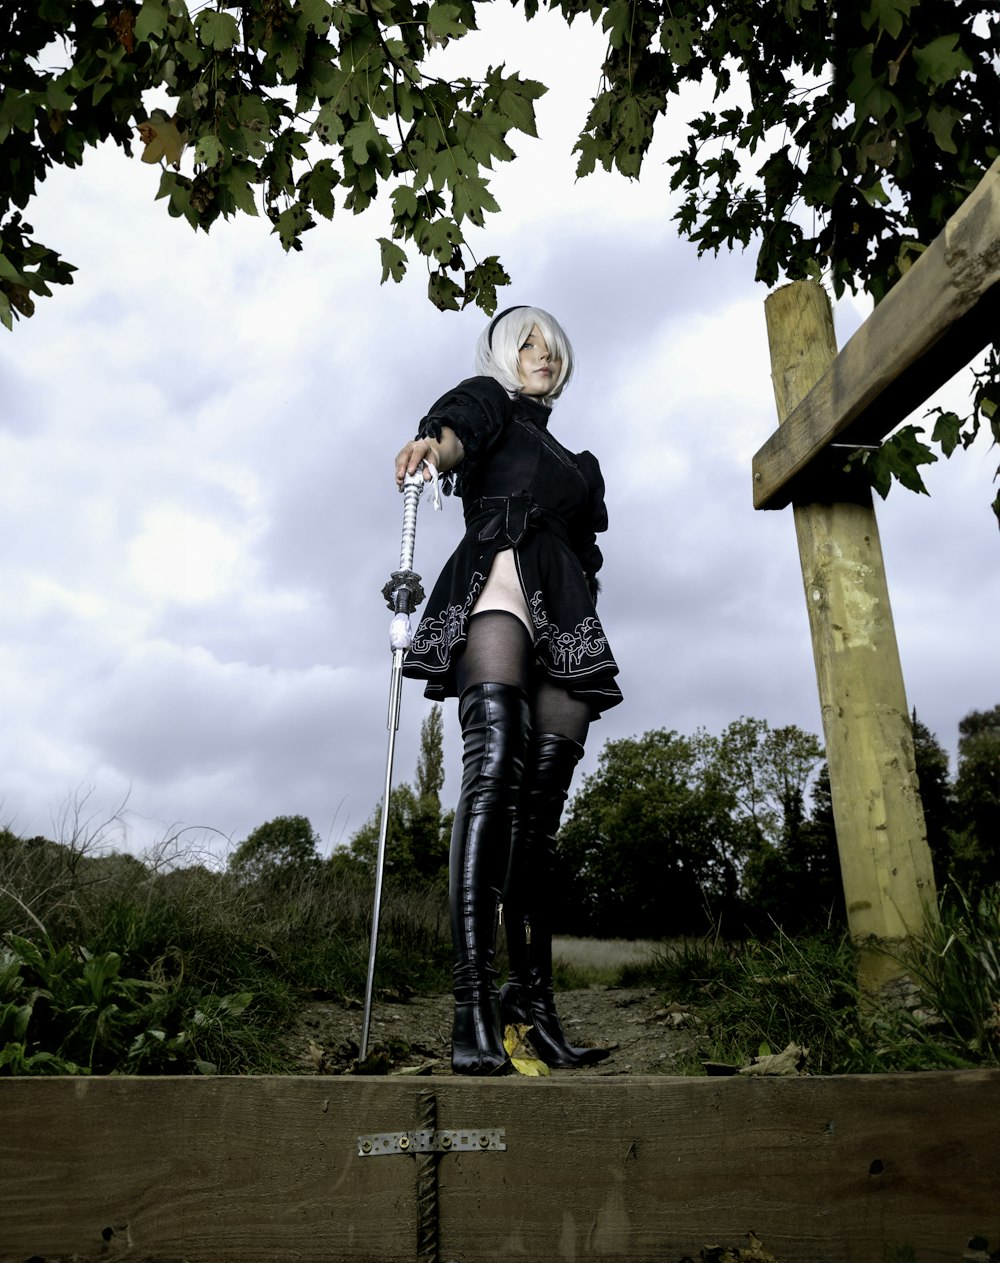 a woman in a black outfit and boots standing on a wooden platform